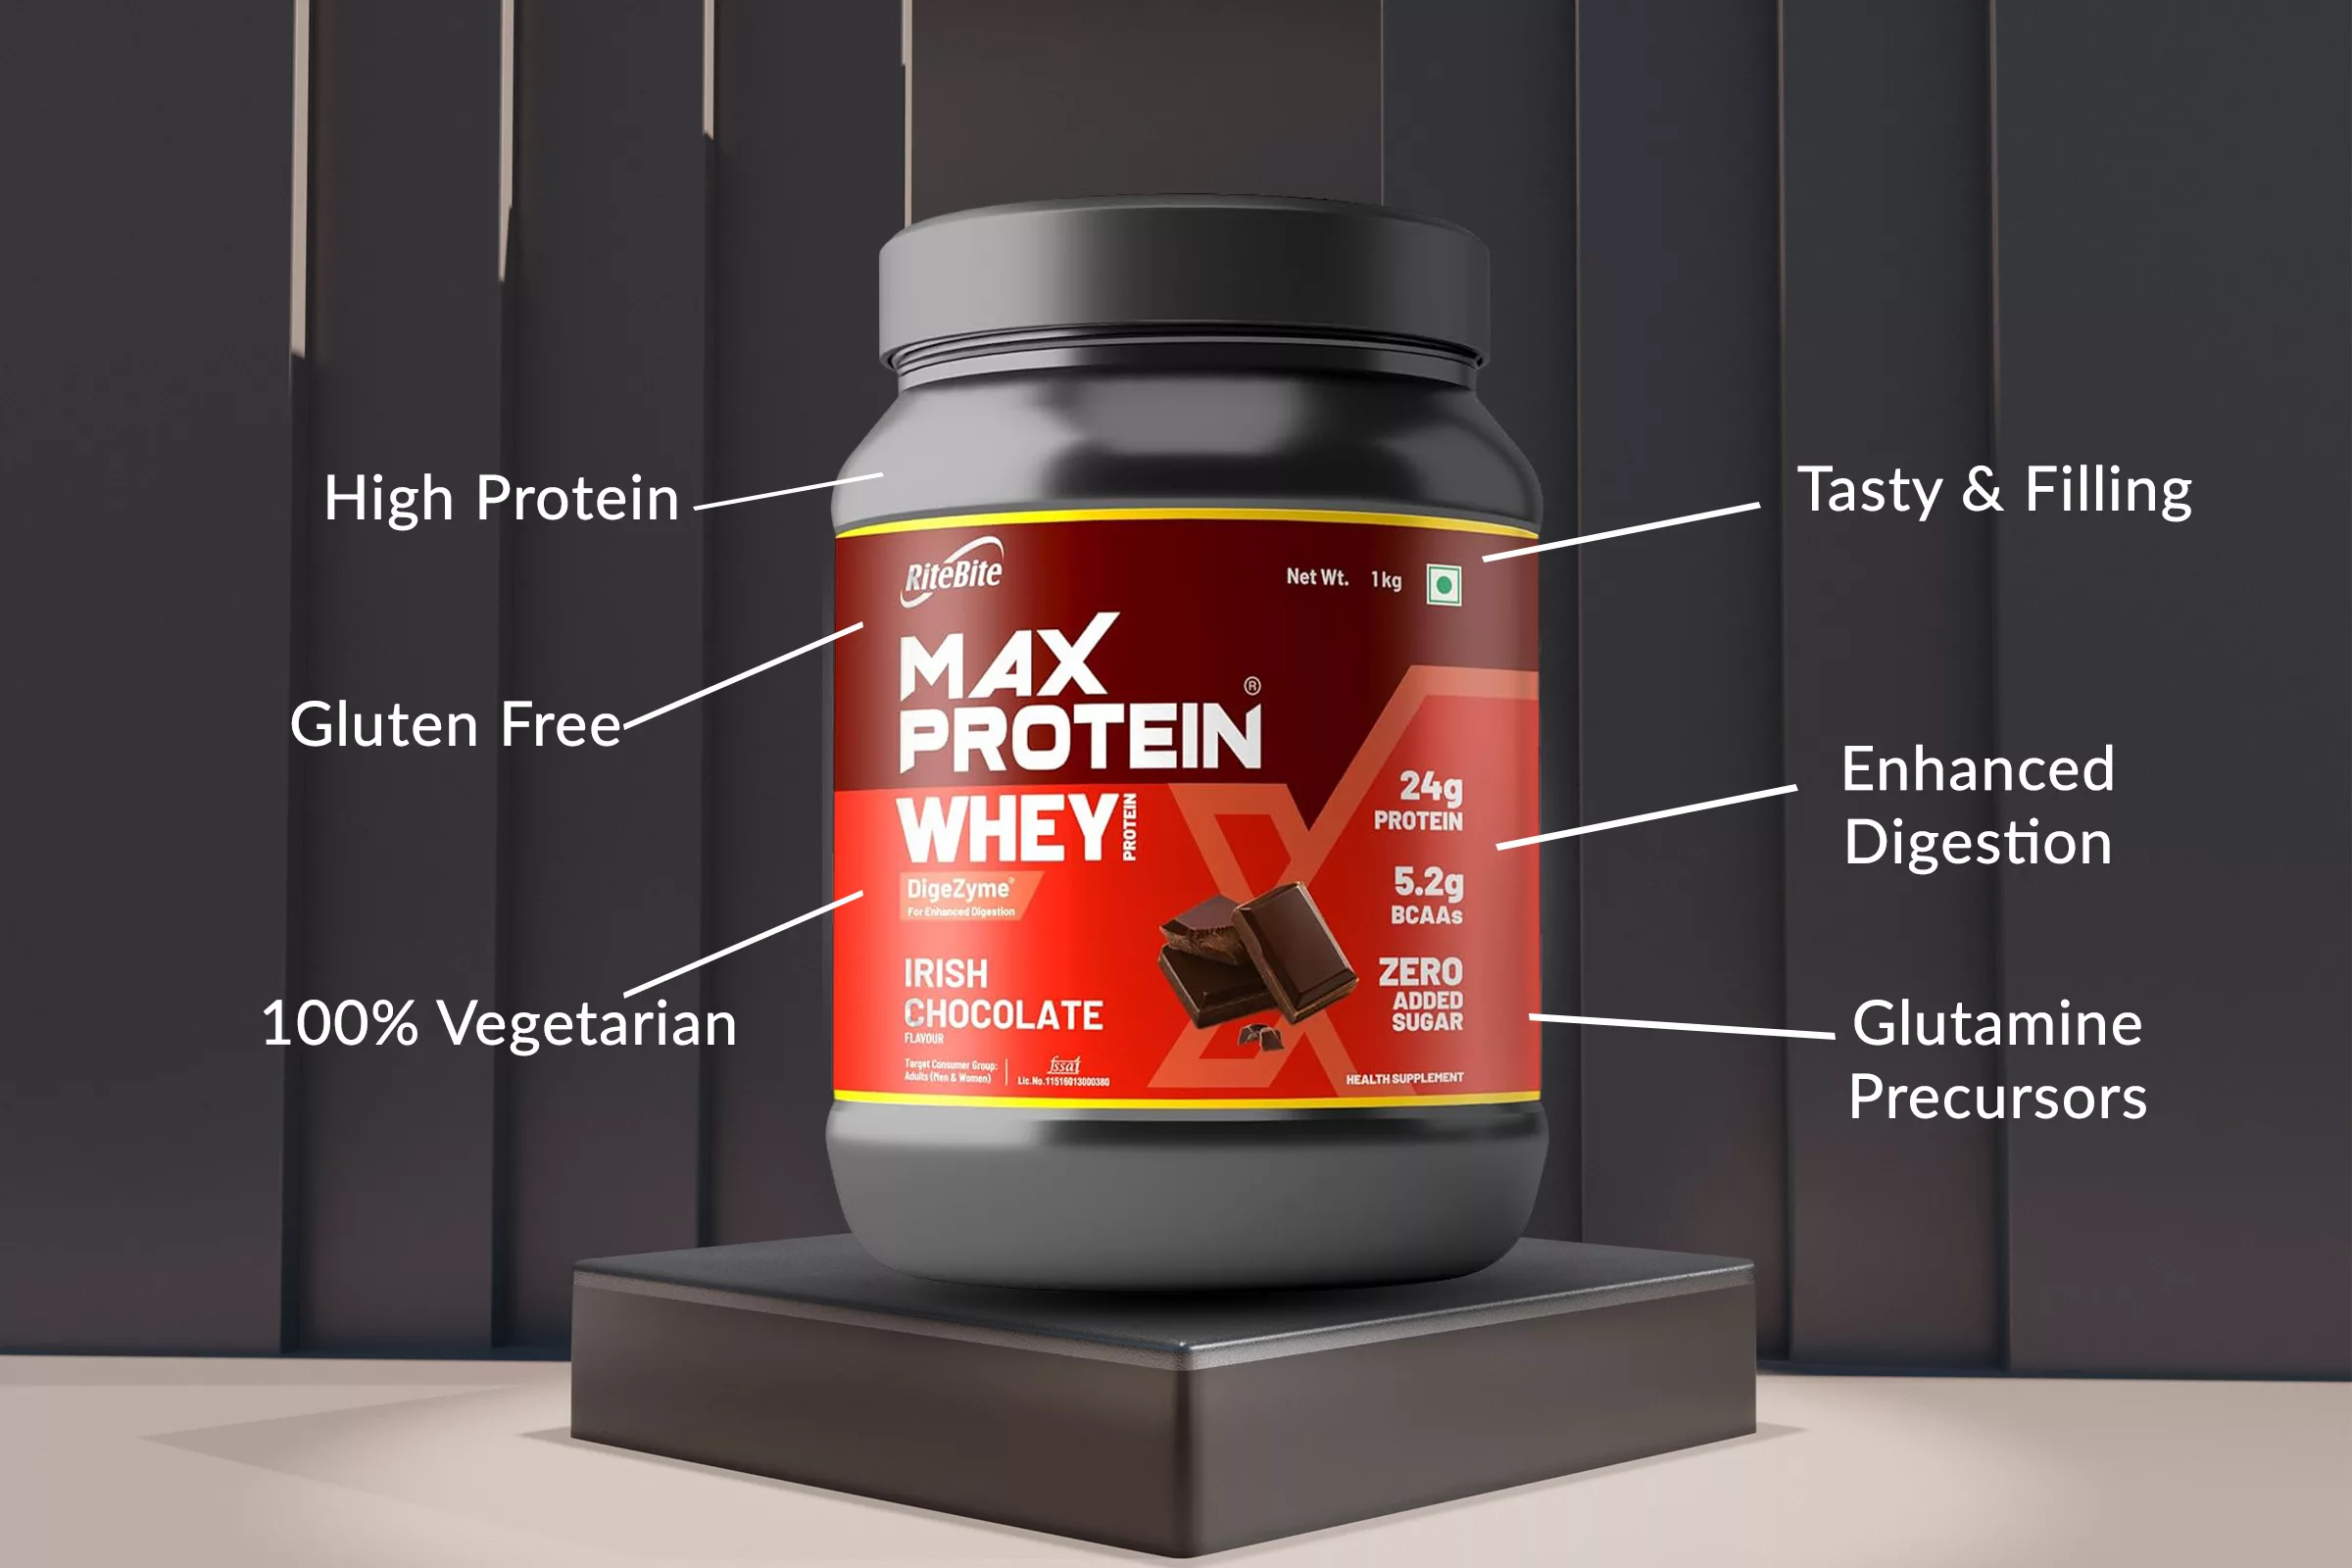 The Essence of Max Protein Whey